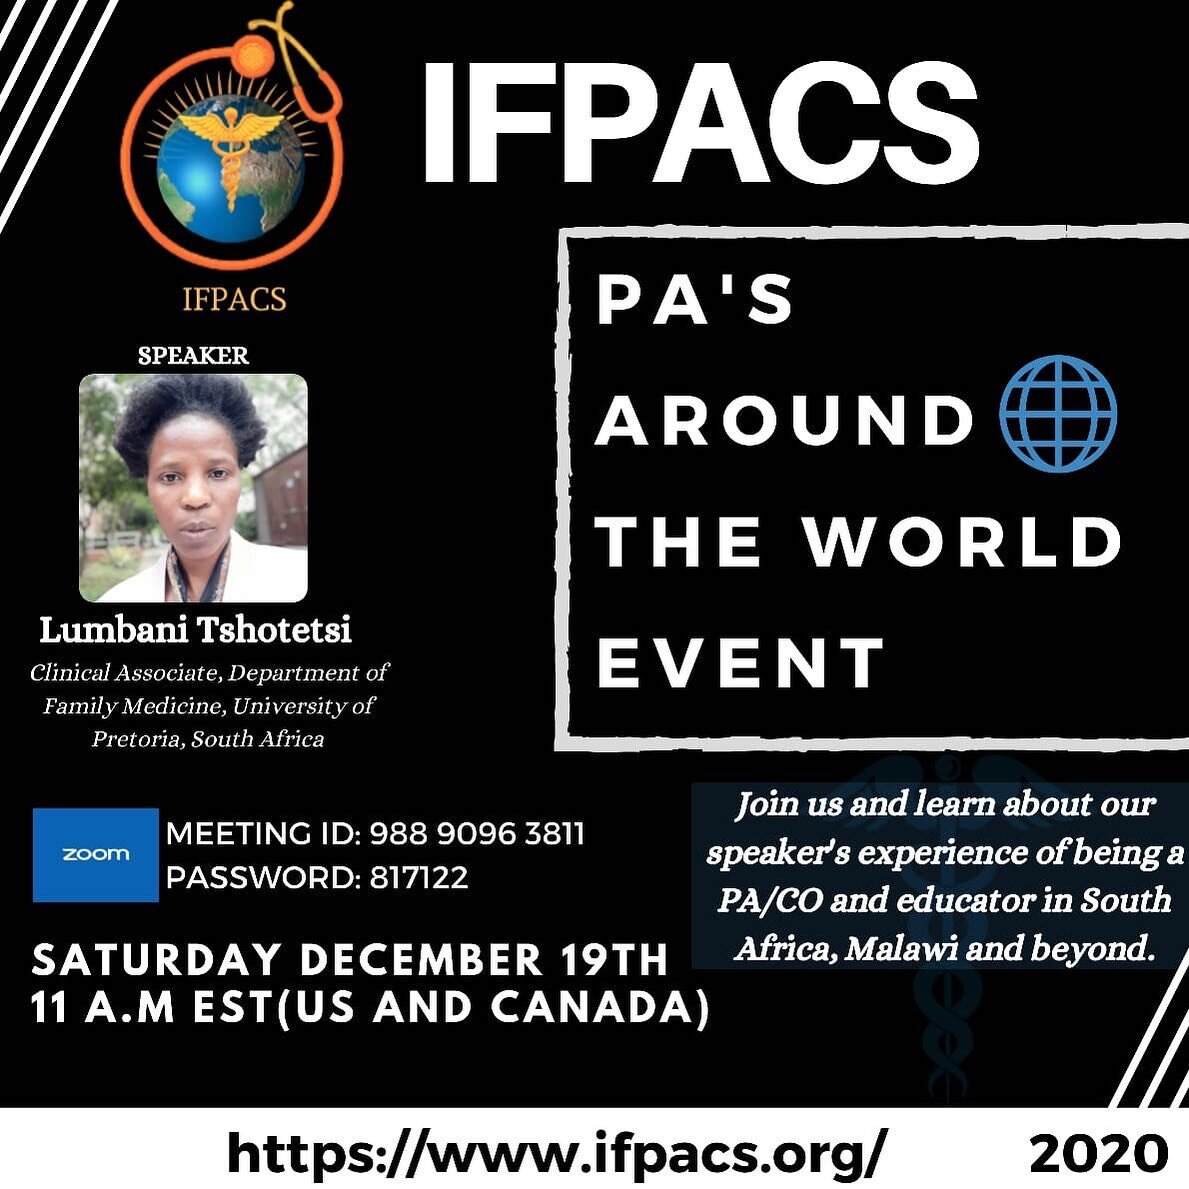 !!!We are very excited to announce our next official event: 
PA's Around the World!!!

This is our first iteration of this event and the speaker will be Lumbani Tshotetsi, a Clinical Associate in South Africa.

Come and join us and learn more about a